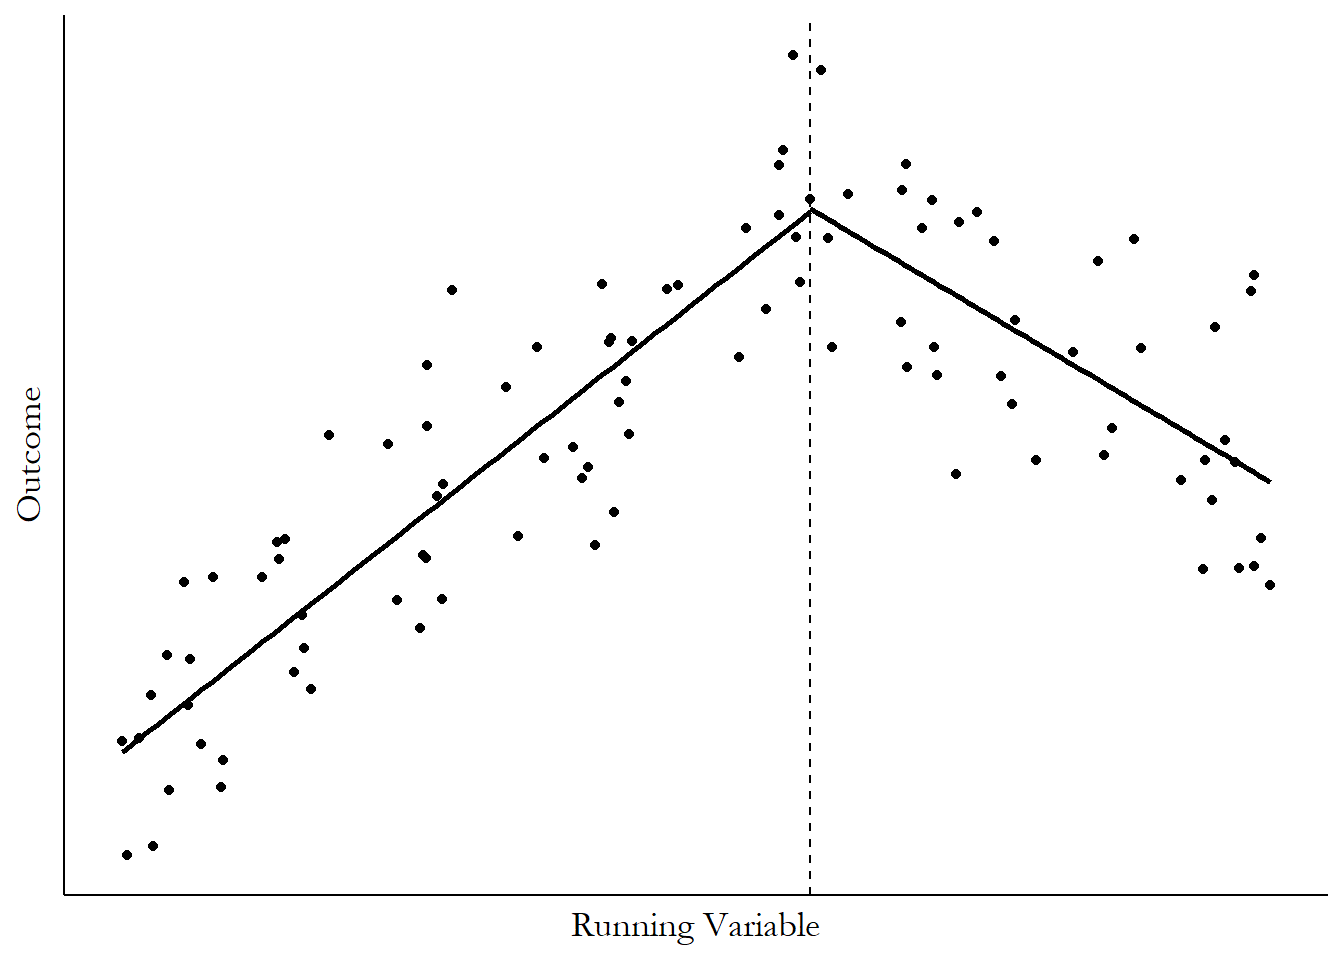 A scatterplot with a line fit on top, and a break. There's a clear upward slope to the left of the cutoff, and a clear downward slope to the right, but the fit lines meet each other at the cutoff.